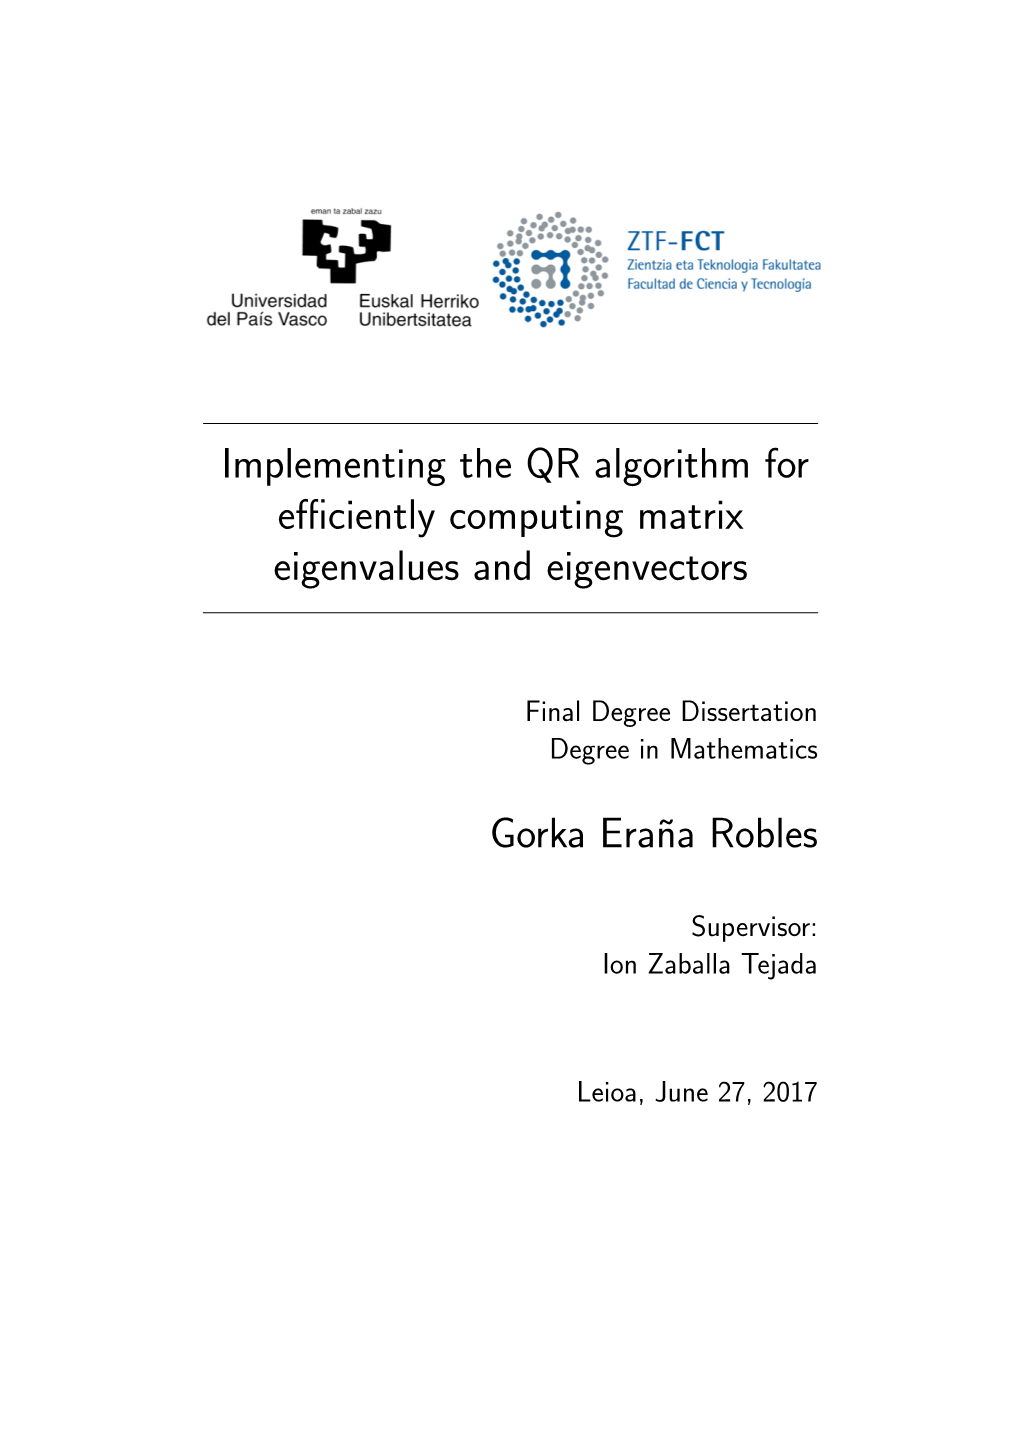 Implementing the QR Algorithm for Efficiently Computing Matrix